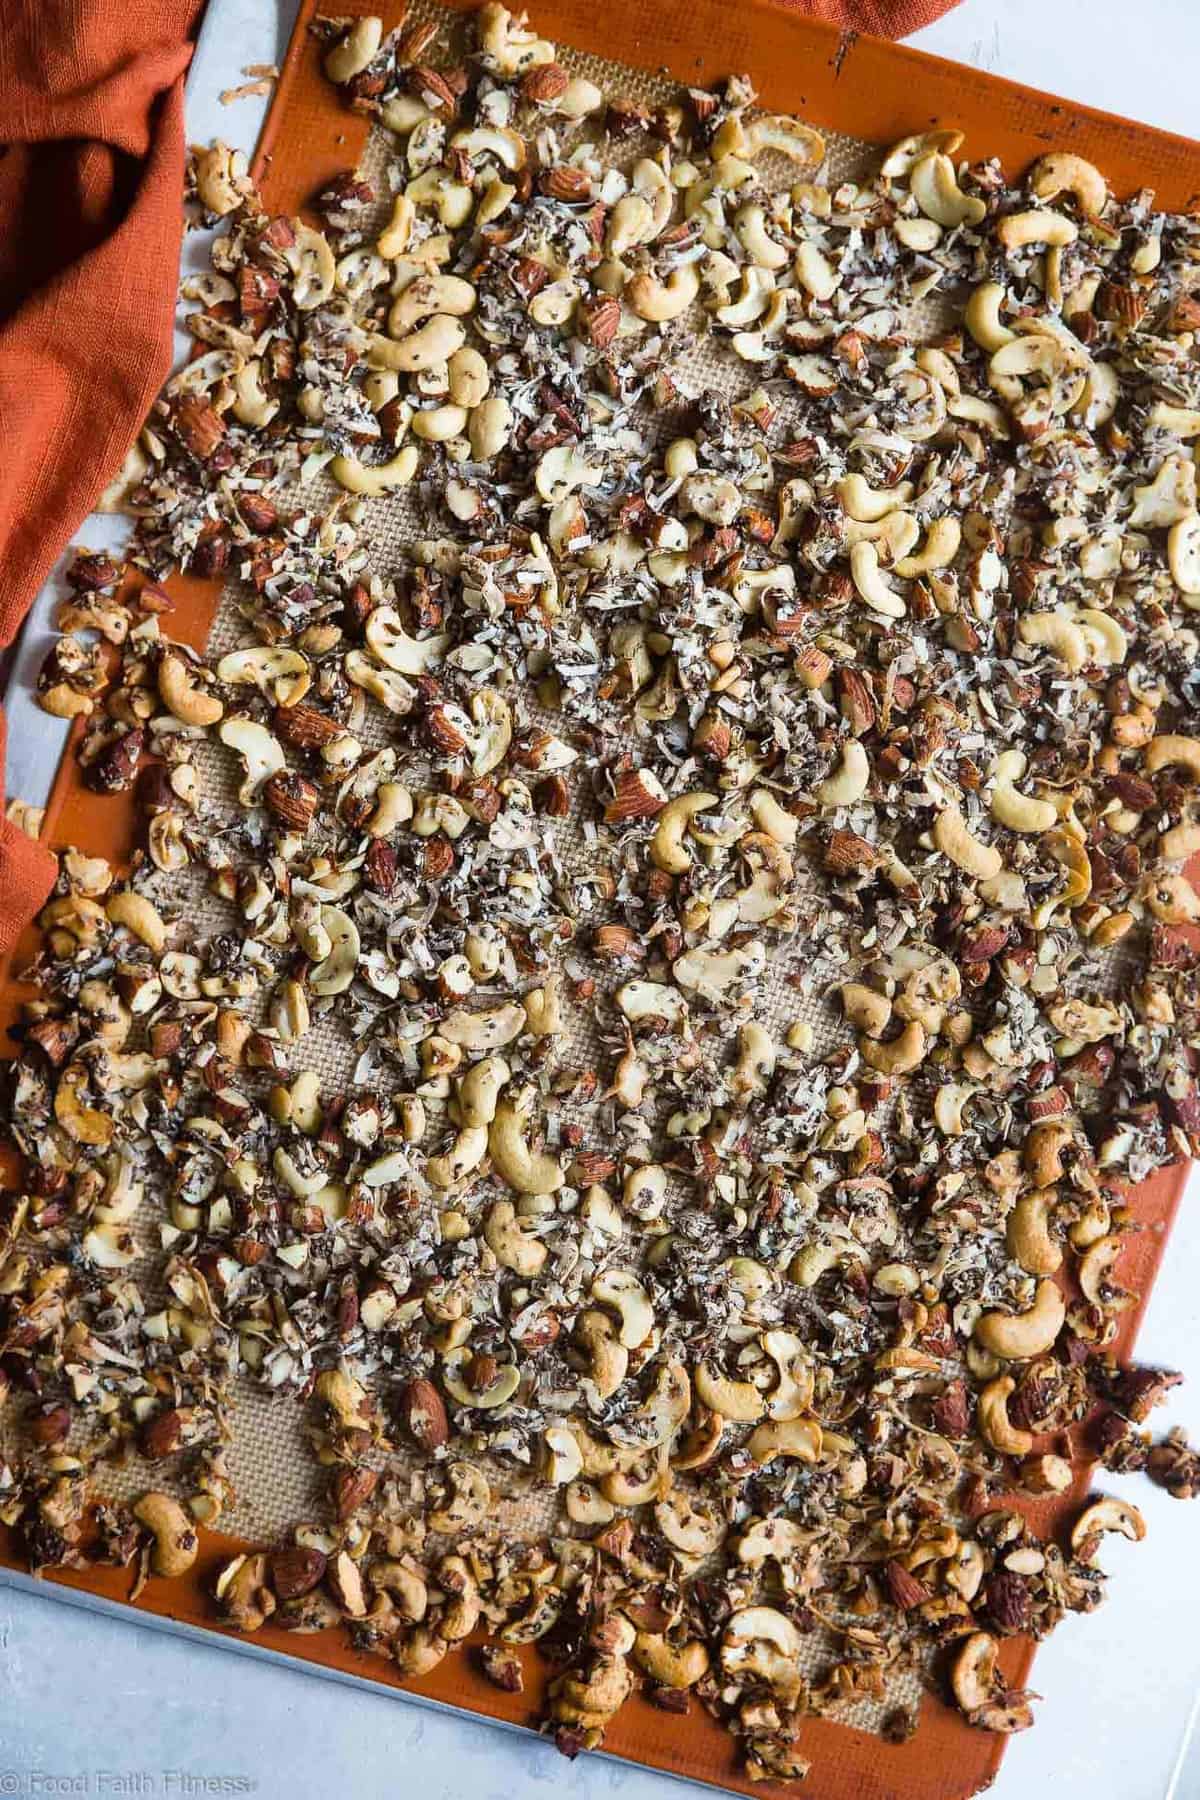 Coconut Cashew Grain Free Low Carb Keto Granola - SO crispy and crunchy that you'll never guess it's secretly healthy, low carb, gluten and  sugar free and paleo and vegan friendly! The perfect breakfast or snack that's great for meal prep! | #Foodfaithfitness | #Paleo #Vegan #Keto #Lowcarb #Healthy